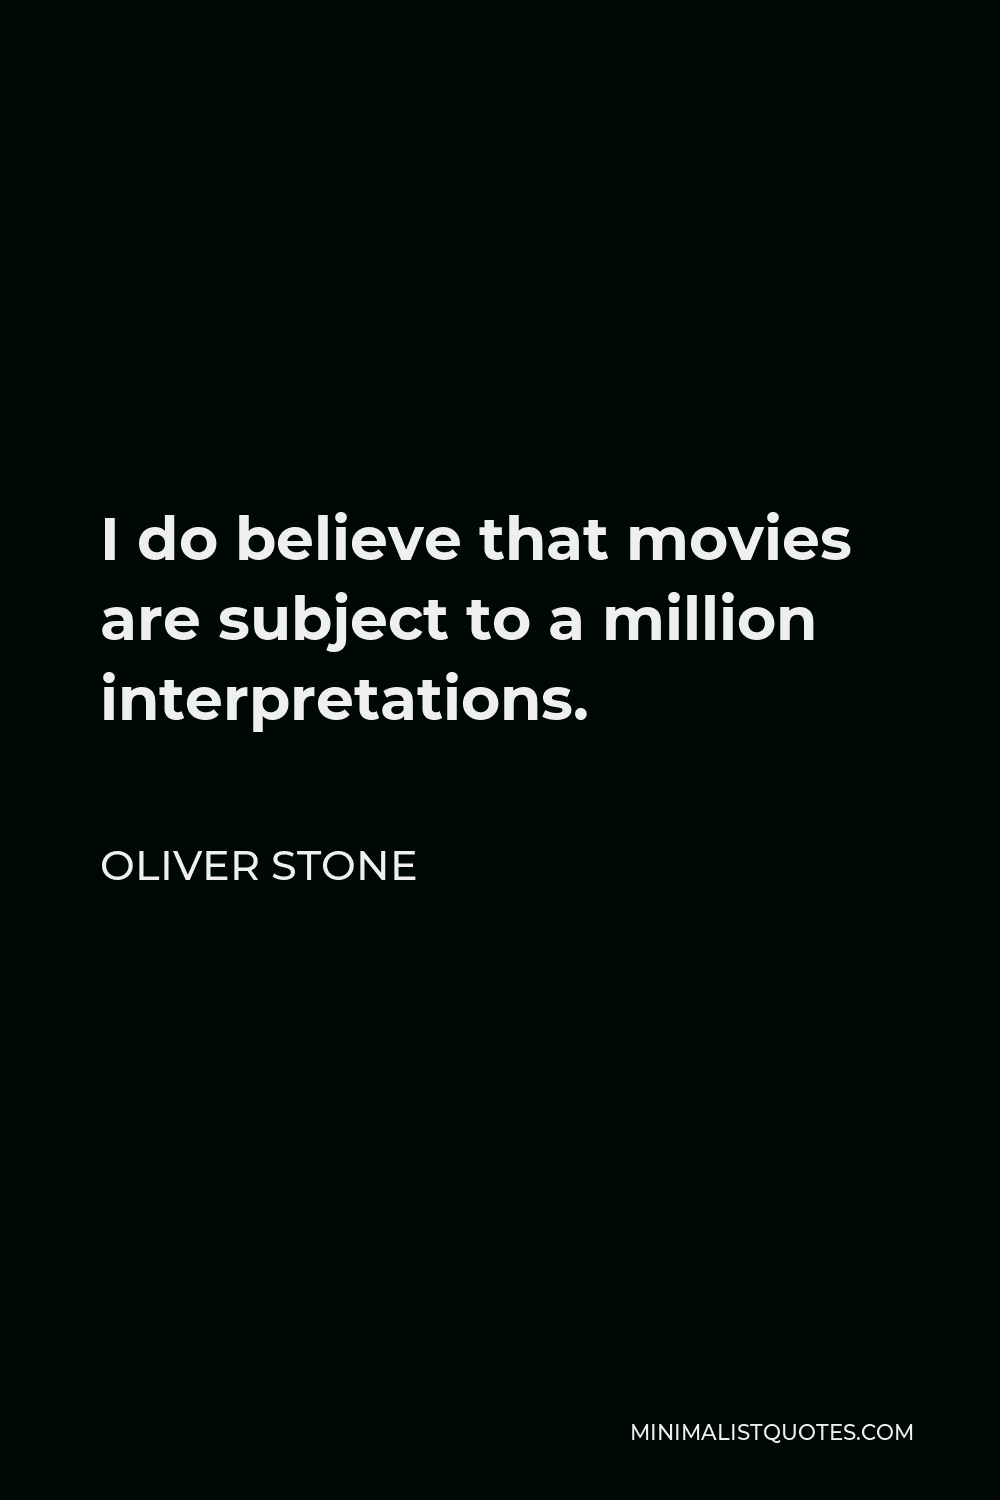 Oliver Stone Quote - I do believe that movies are subject to a million interpretations.